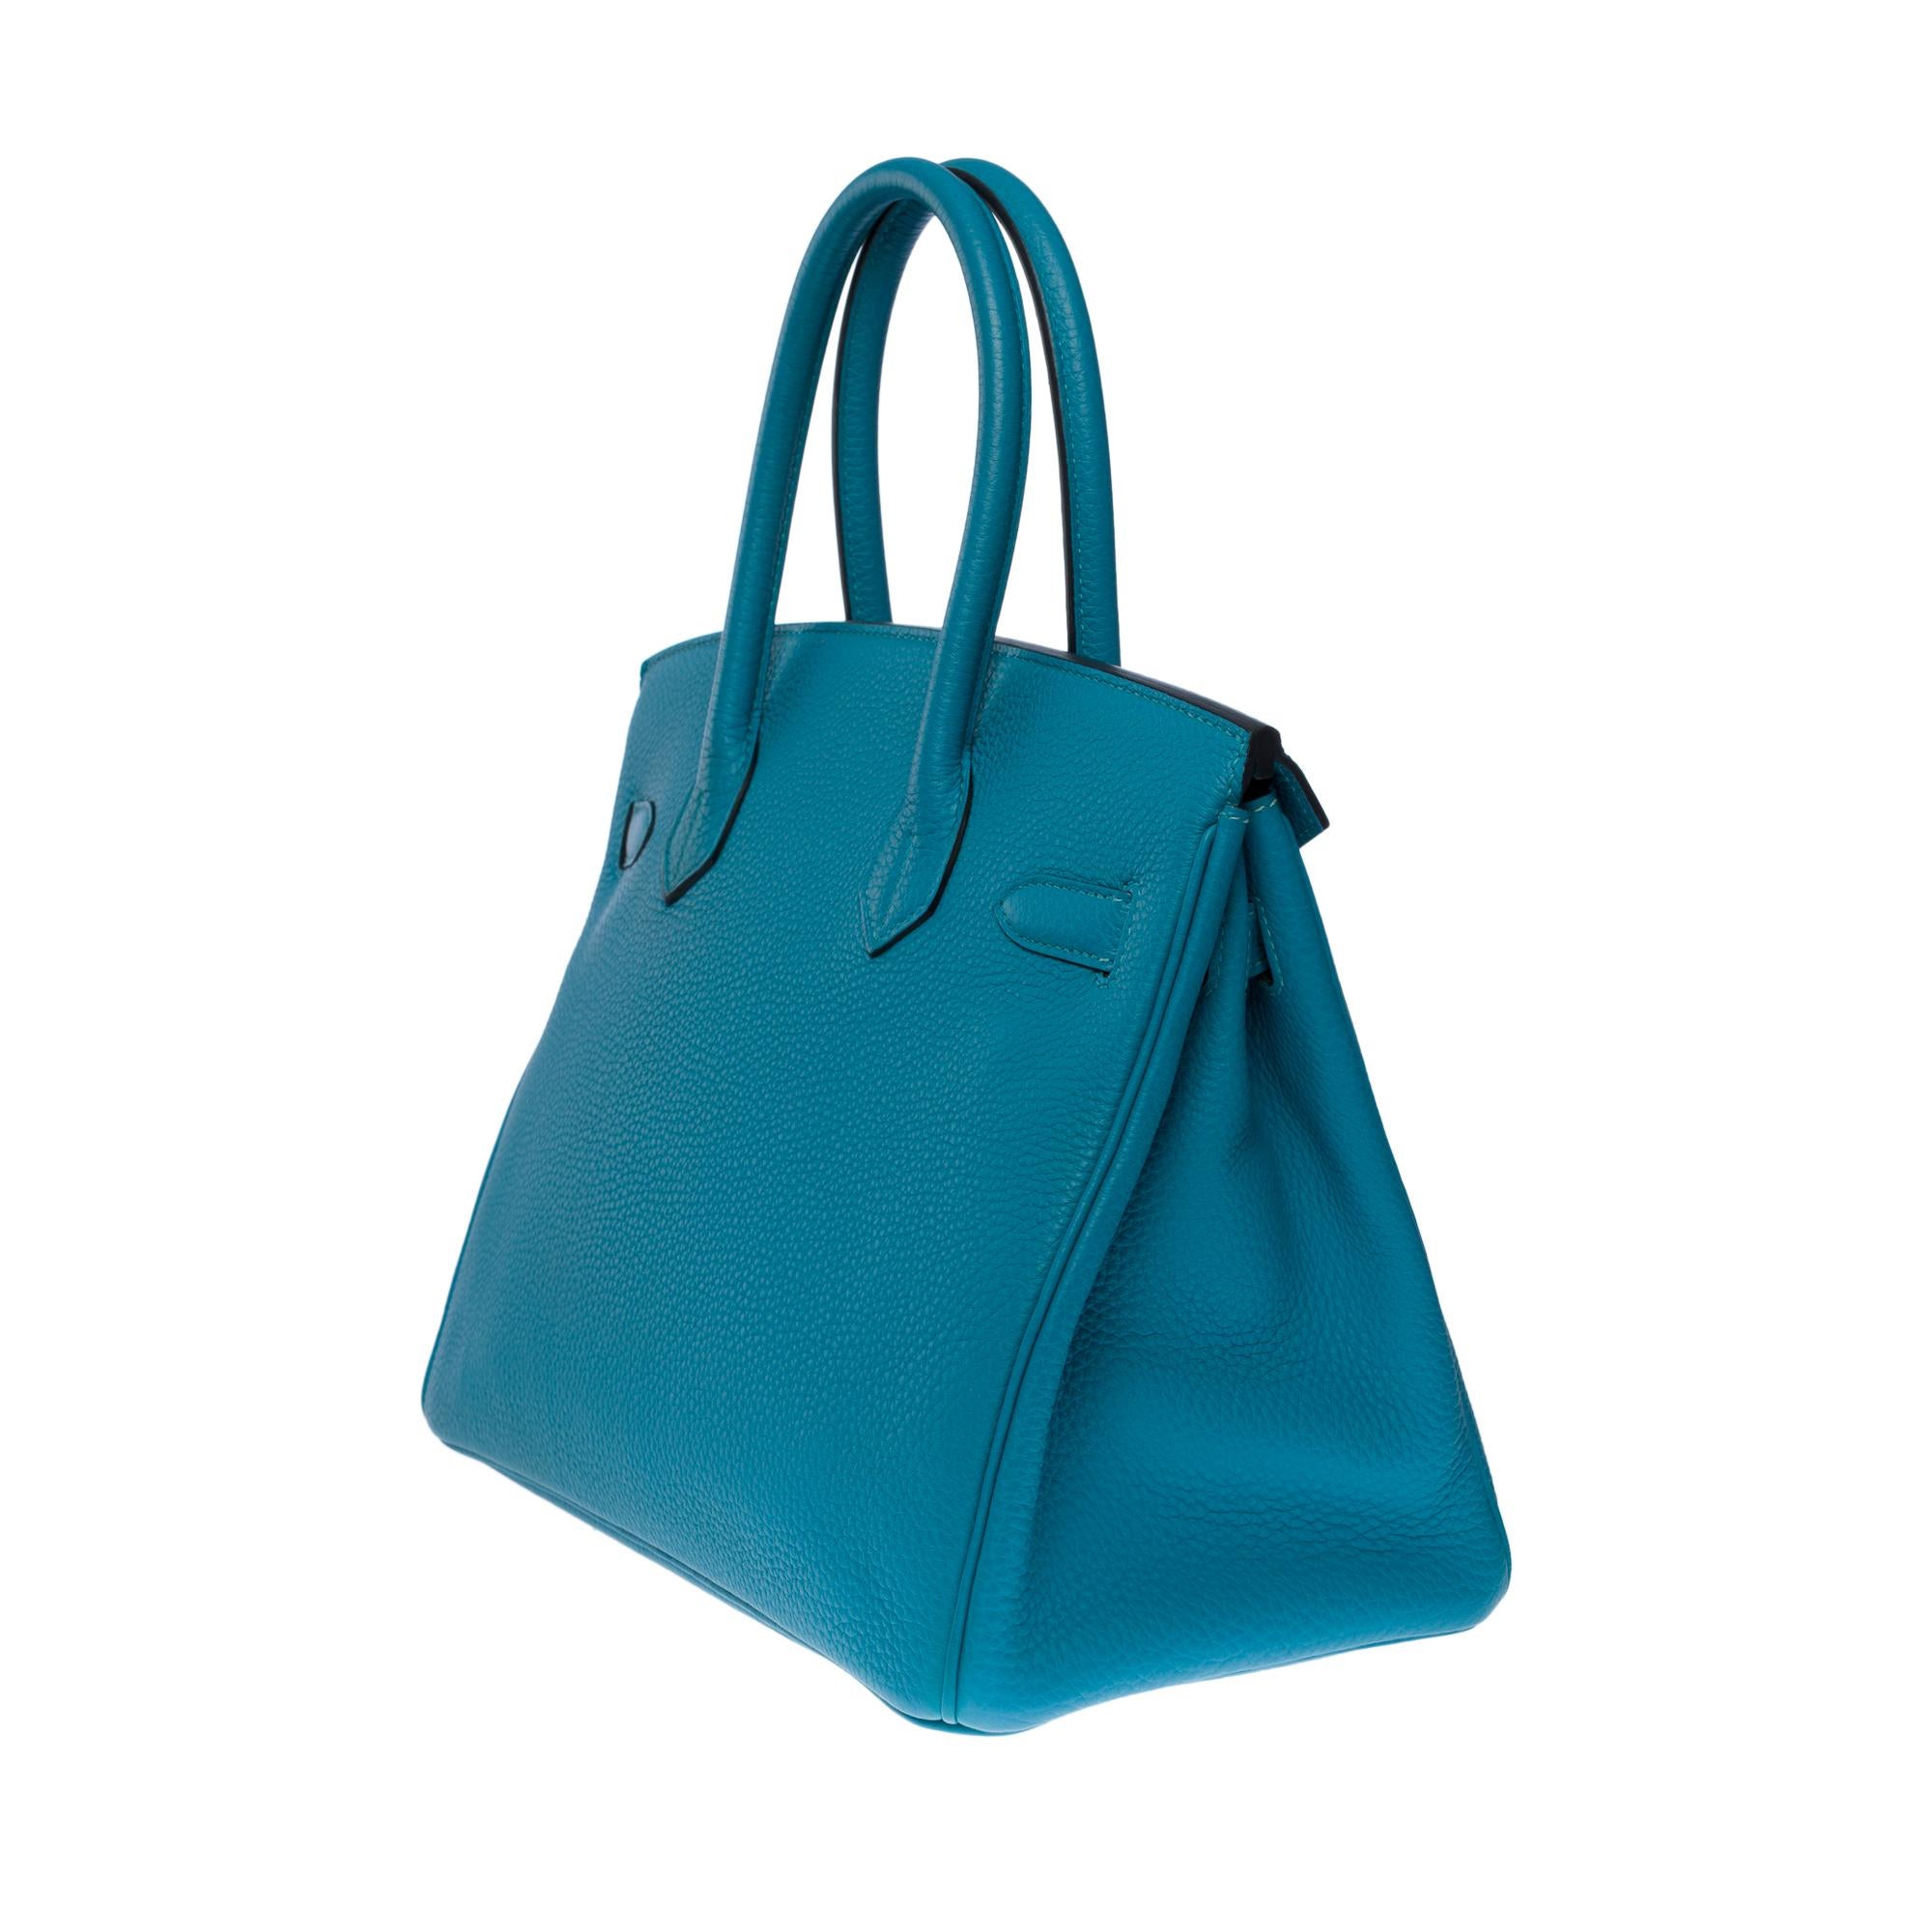 Amazing New Hermès Birkin 30 handbag in Turquoise Togo leather, GHW In New Condition For Sale In Paris, IDF